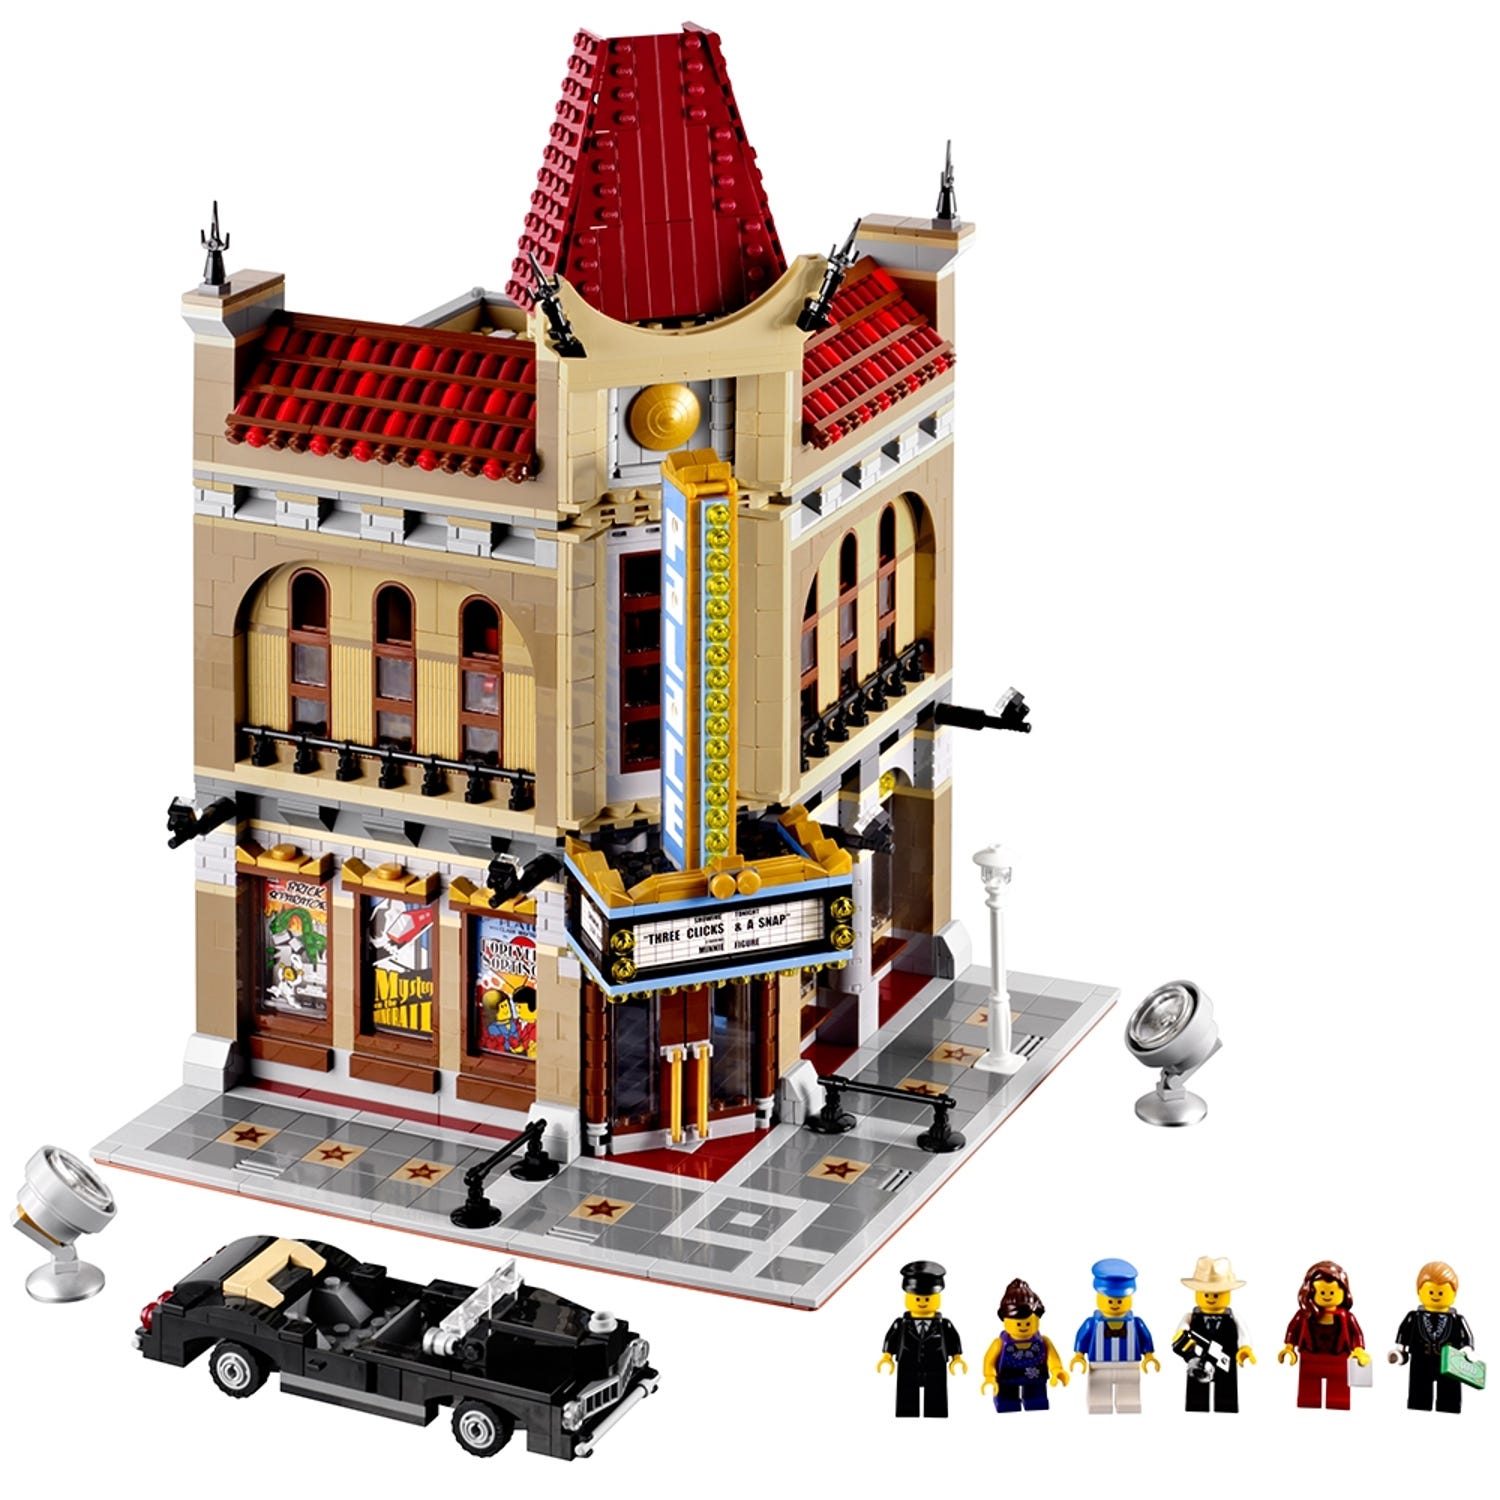 Palace Cinema 10232 | Creator Expert | online at the Official LEGO® Shop US